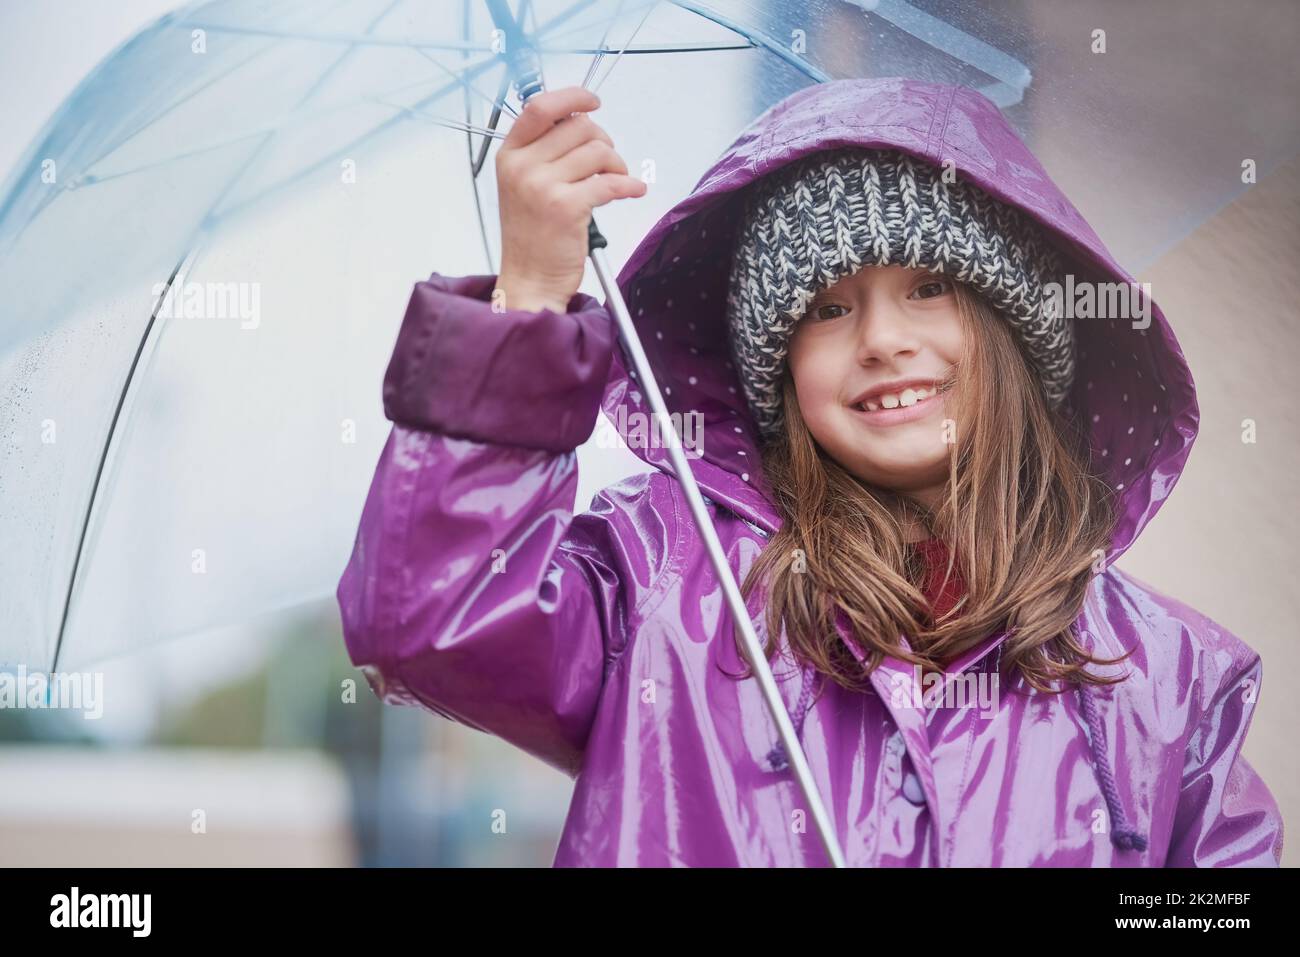 The cold never bothered me anyway. Portrait of a little girl standing under an umbrella outside. Stock Photo